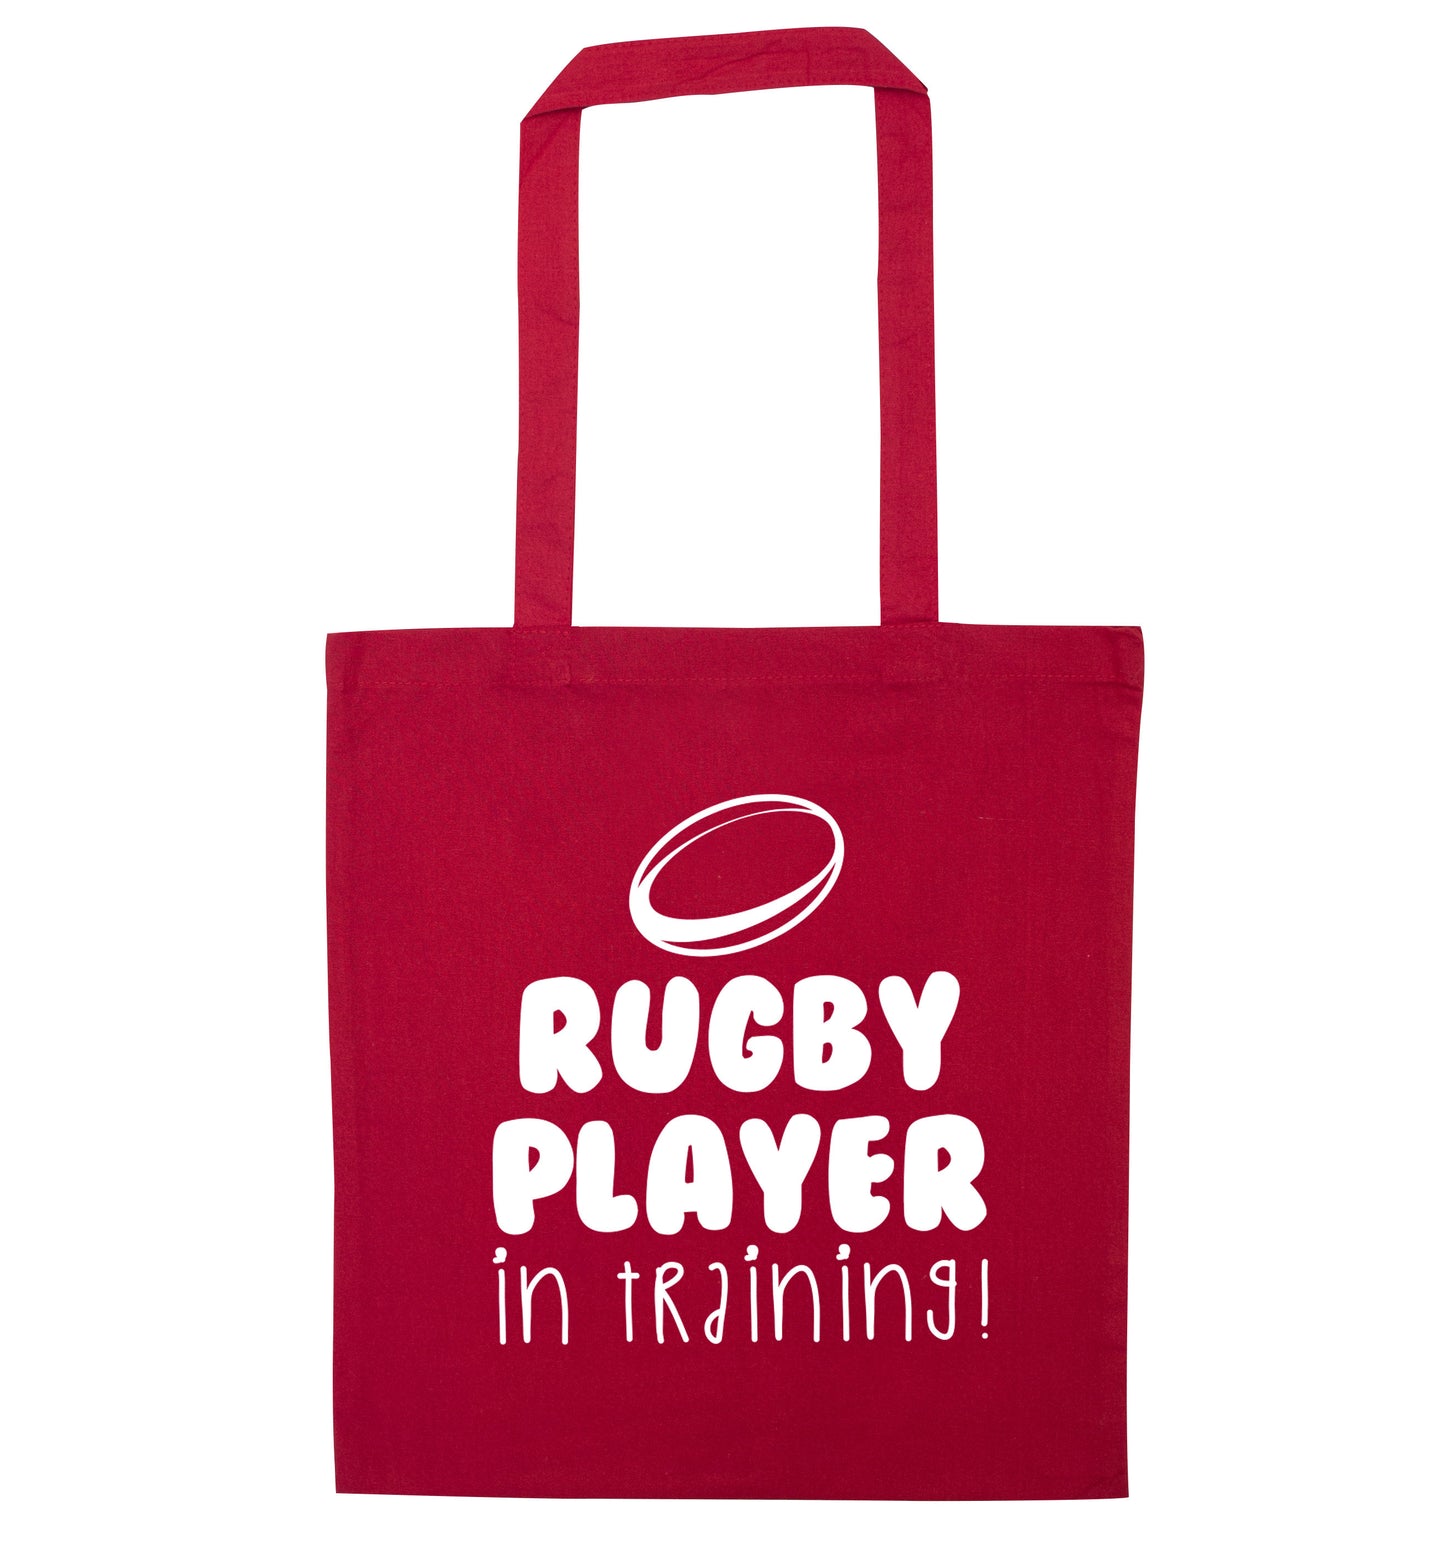 Rugby player in training red tote bag